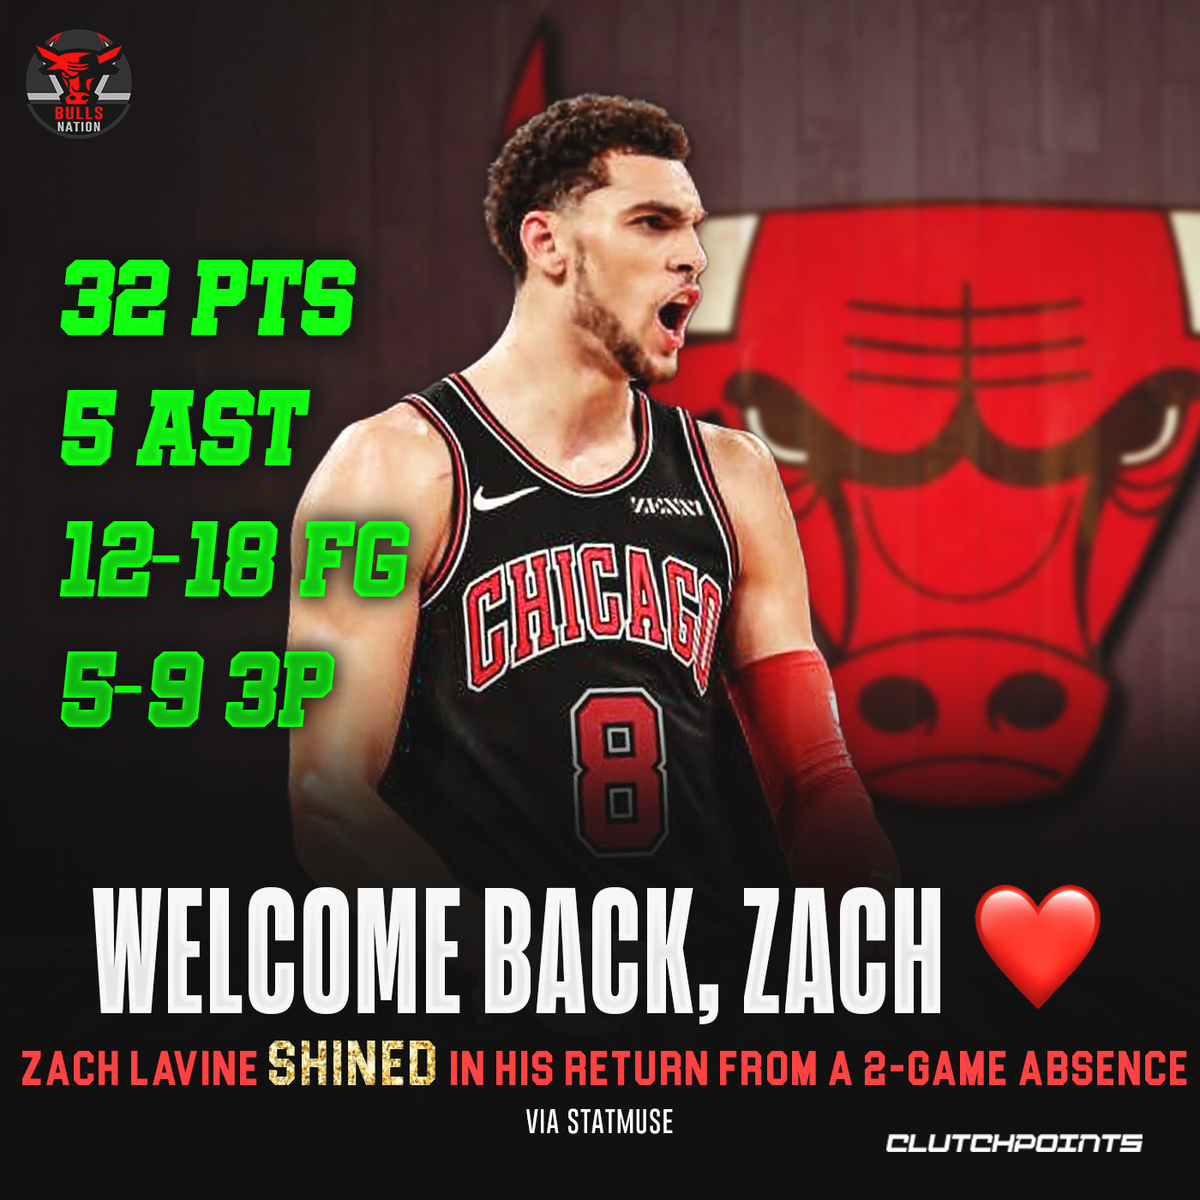 This is Zach LaVine's 65th 30-point game.